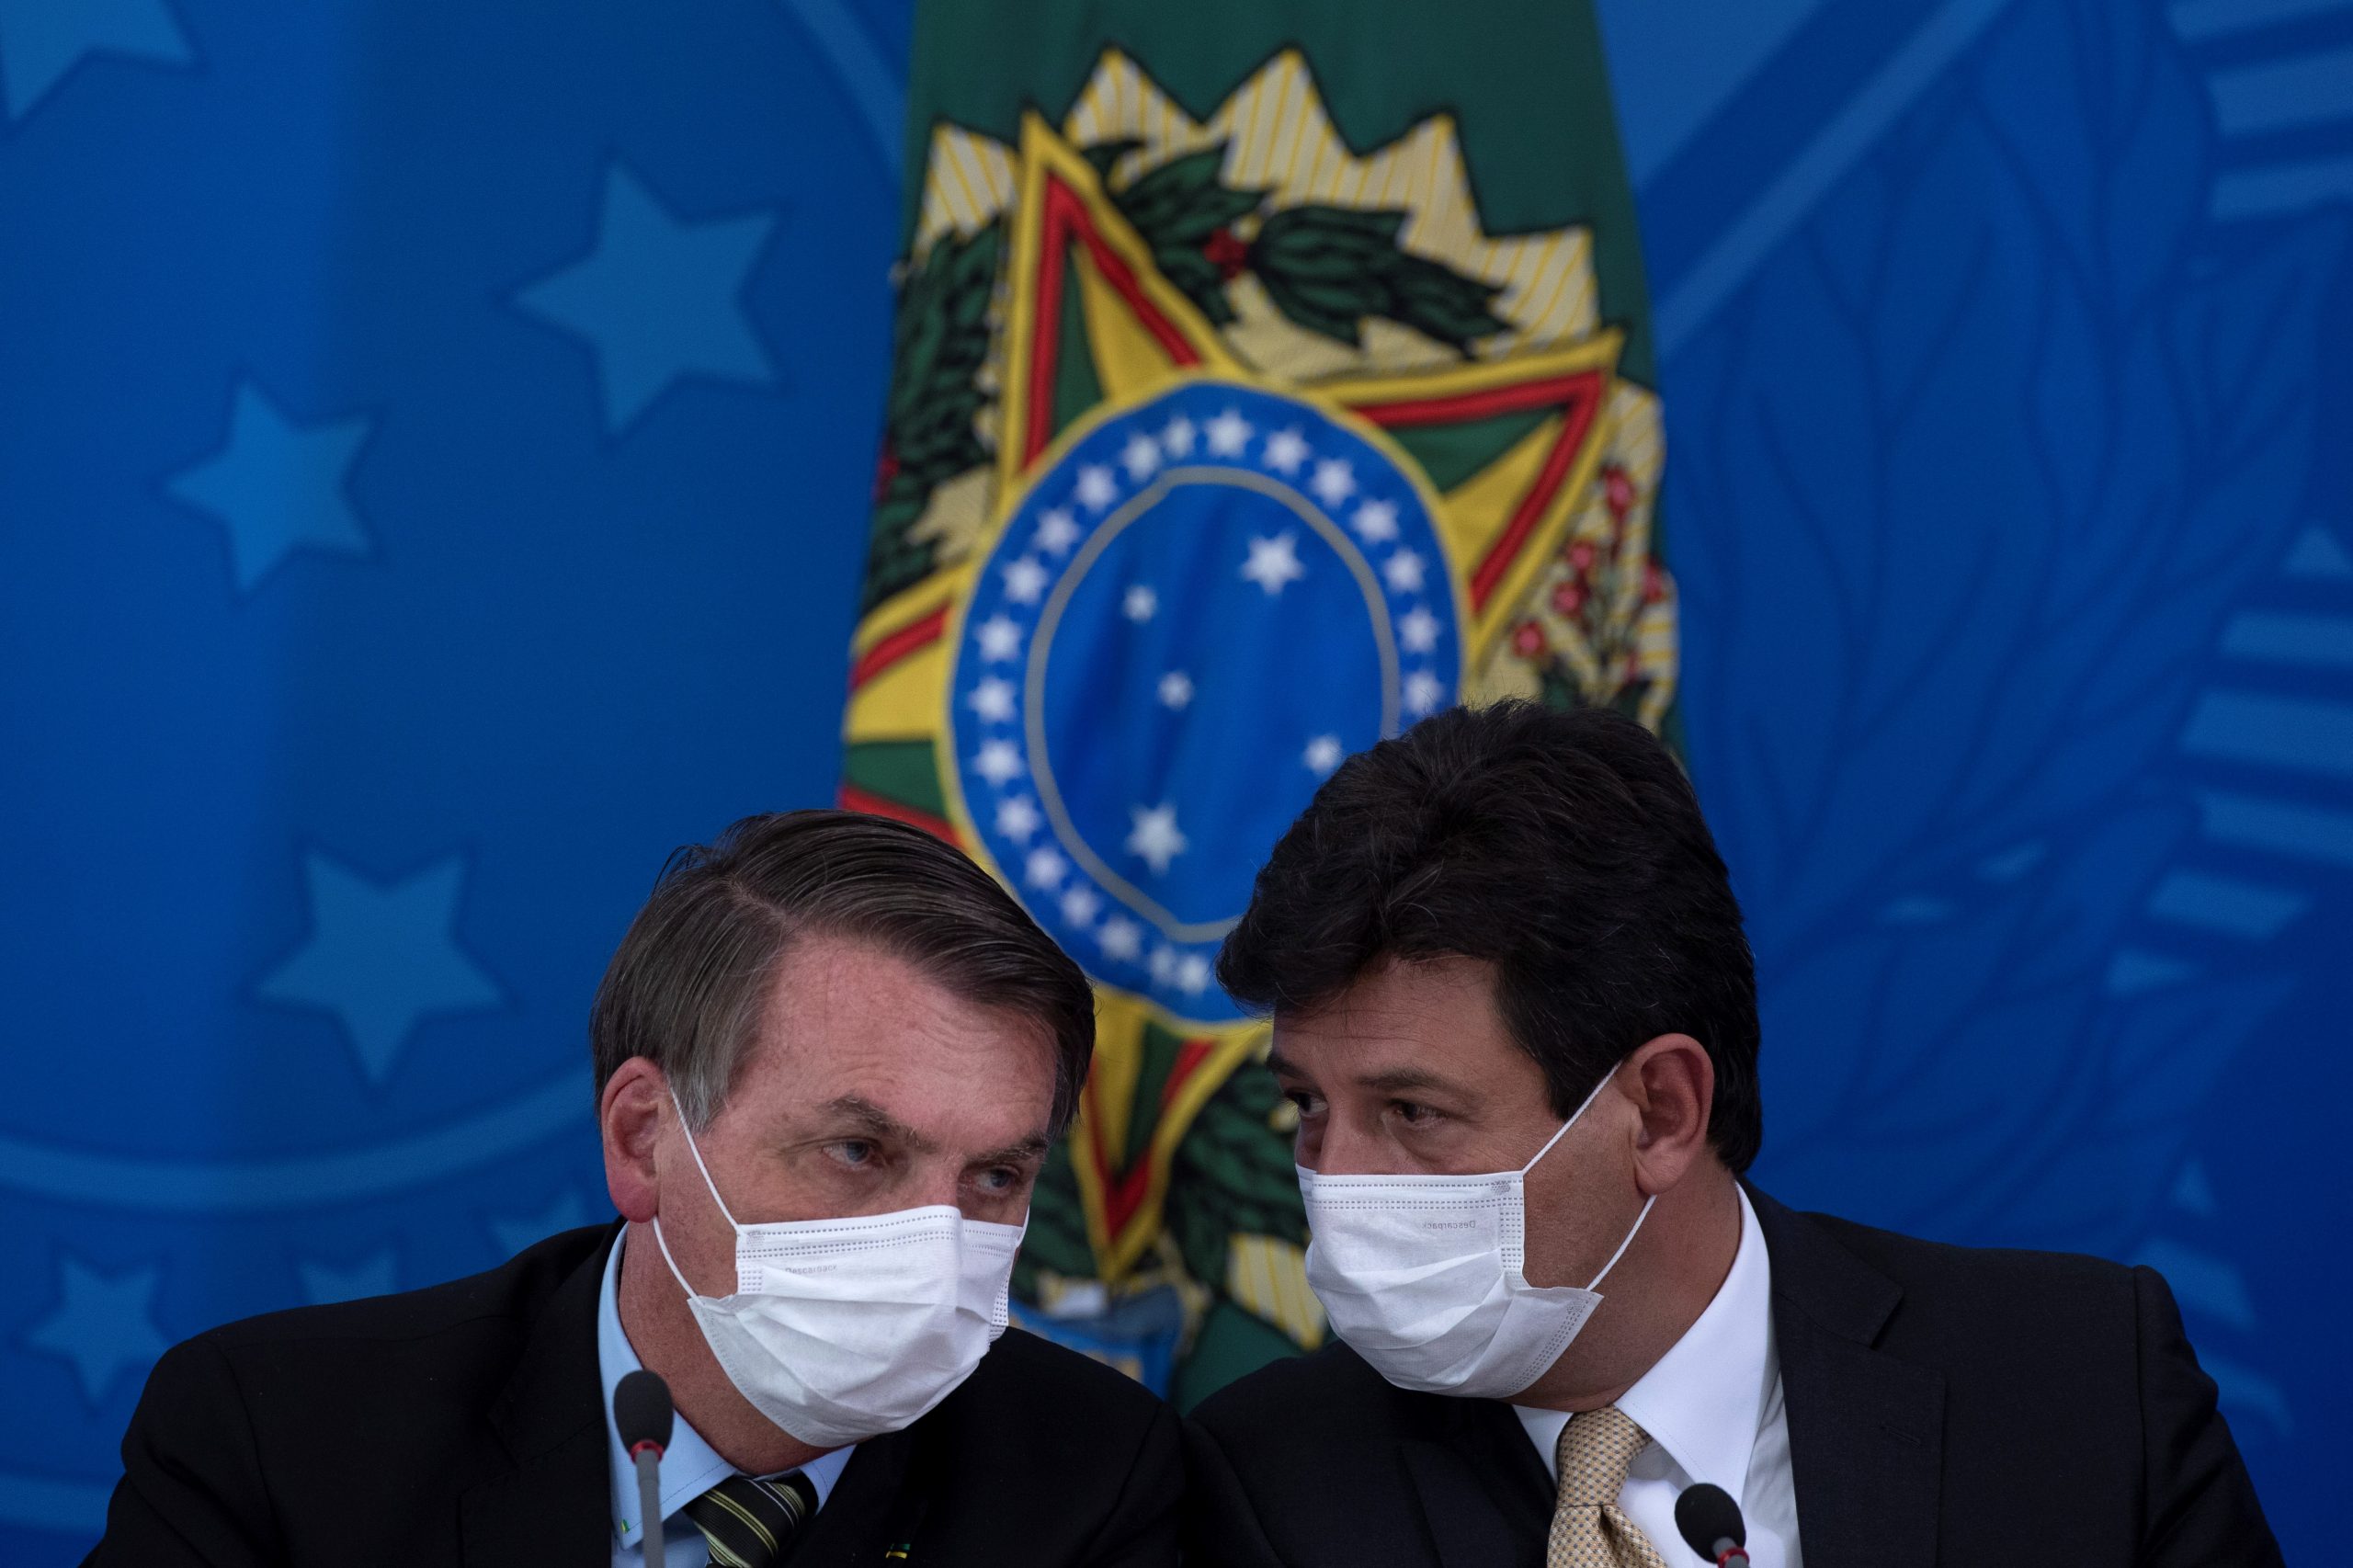 epa08367449 (FILE) President of Brazil Jair Bolsonaro (L) and the Minister of Health Luiz Henrique Mandetta (R) attend a press conference on the measures taken by the government against the spread of the coronavirus, in Brasilia, Brazil, 18 March 2020 (reissued 16 April 2020). According to reports, Brazilian President Jair Bolsonaro on 16 April has fired Brazilian Health Minister Luiz Henrique Mandetta over differences on the respond to the SARS-CoV-2 coronavirus pandemic which causes the Covid-19 disease.  EPA/JOEDSON ALVES